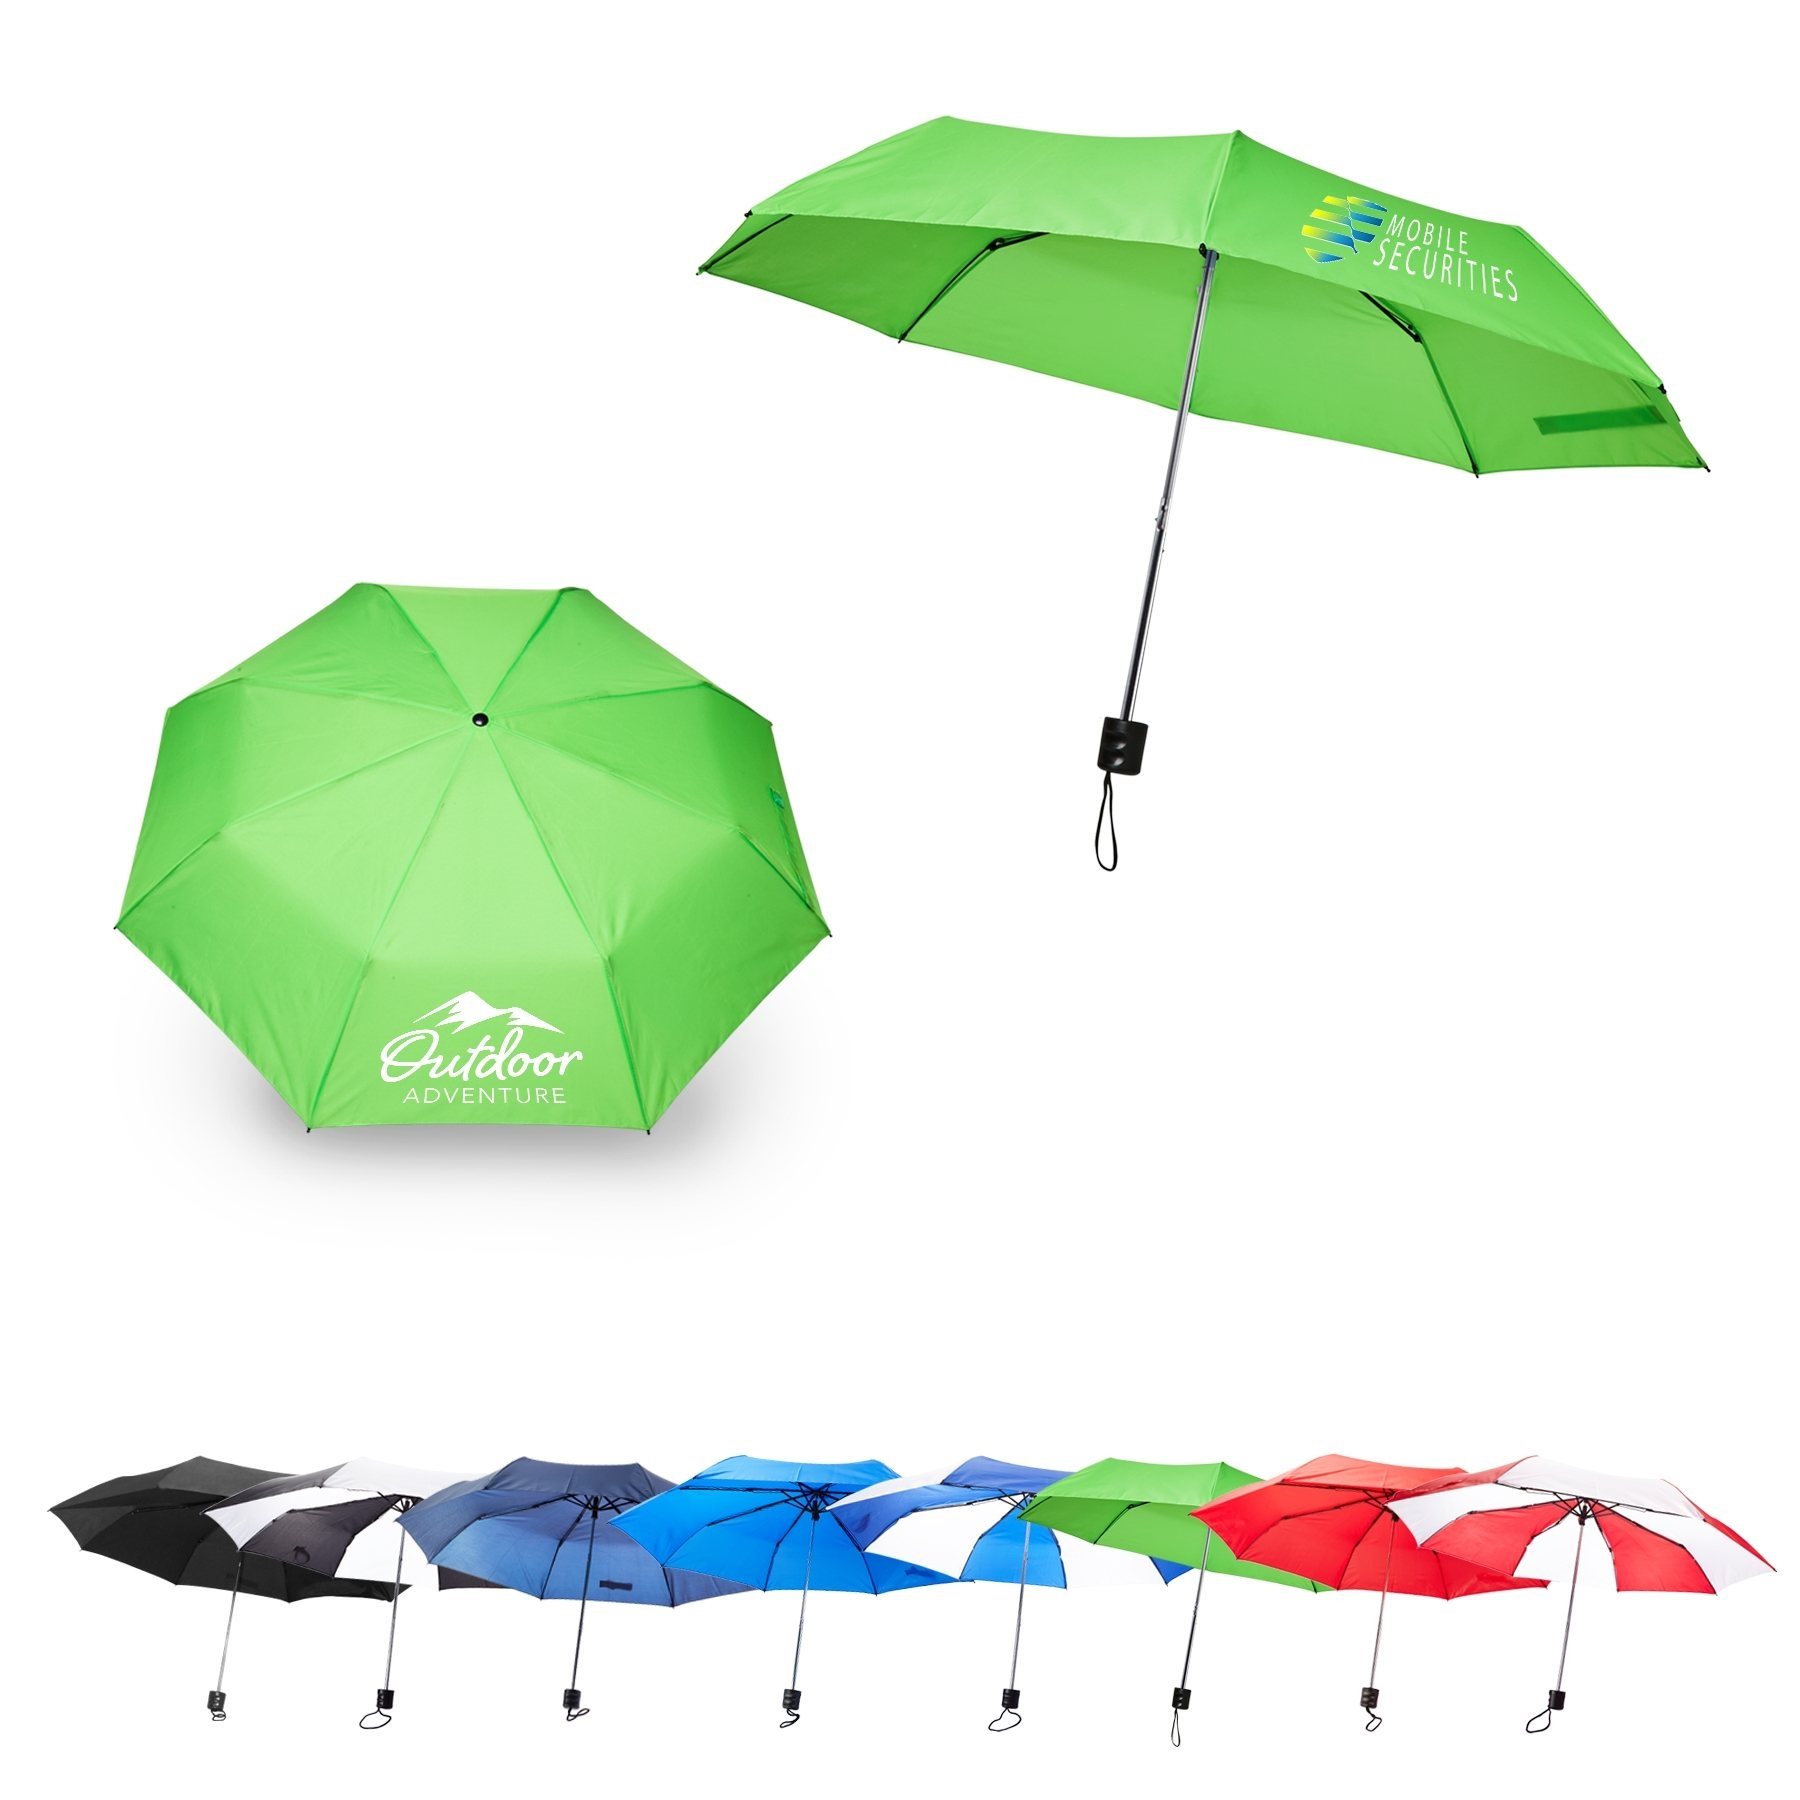 What Are the Different Types of Umbrellas?